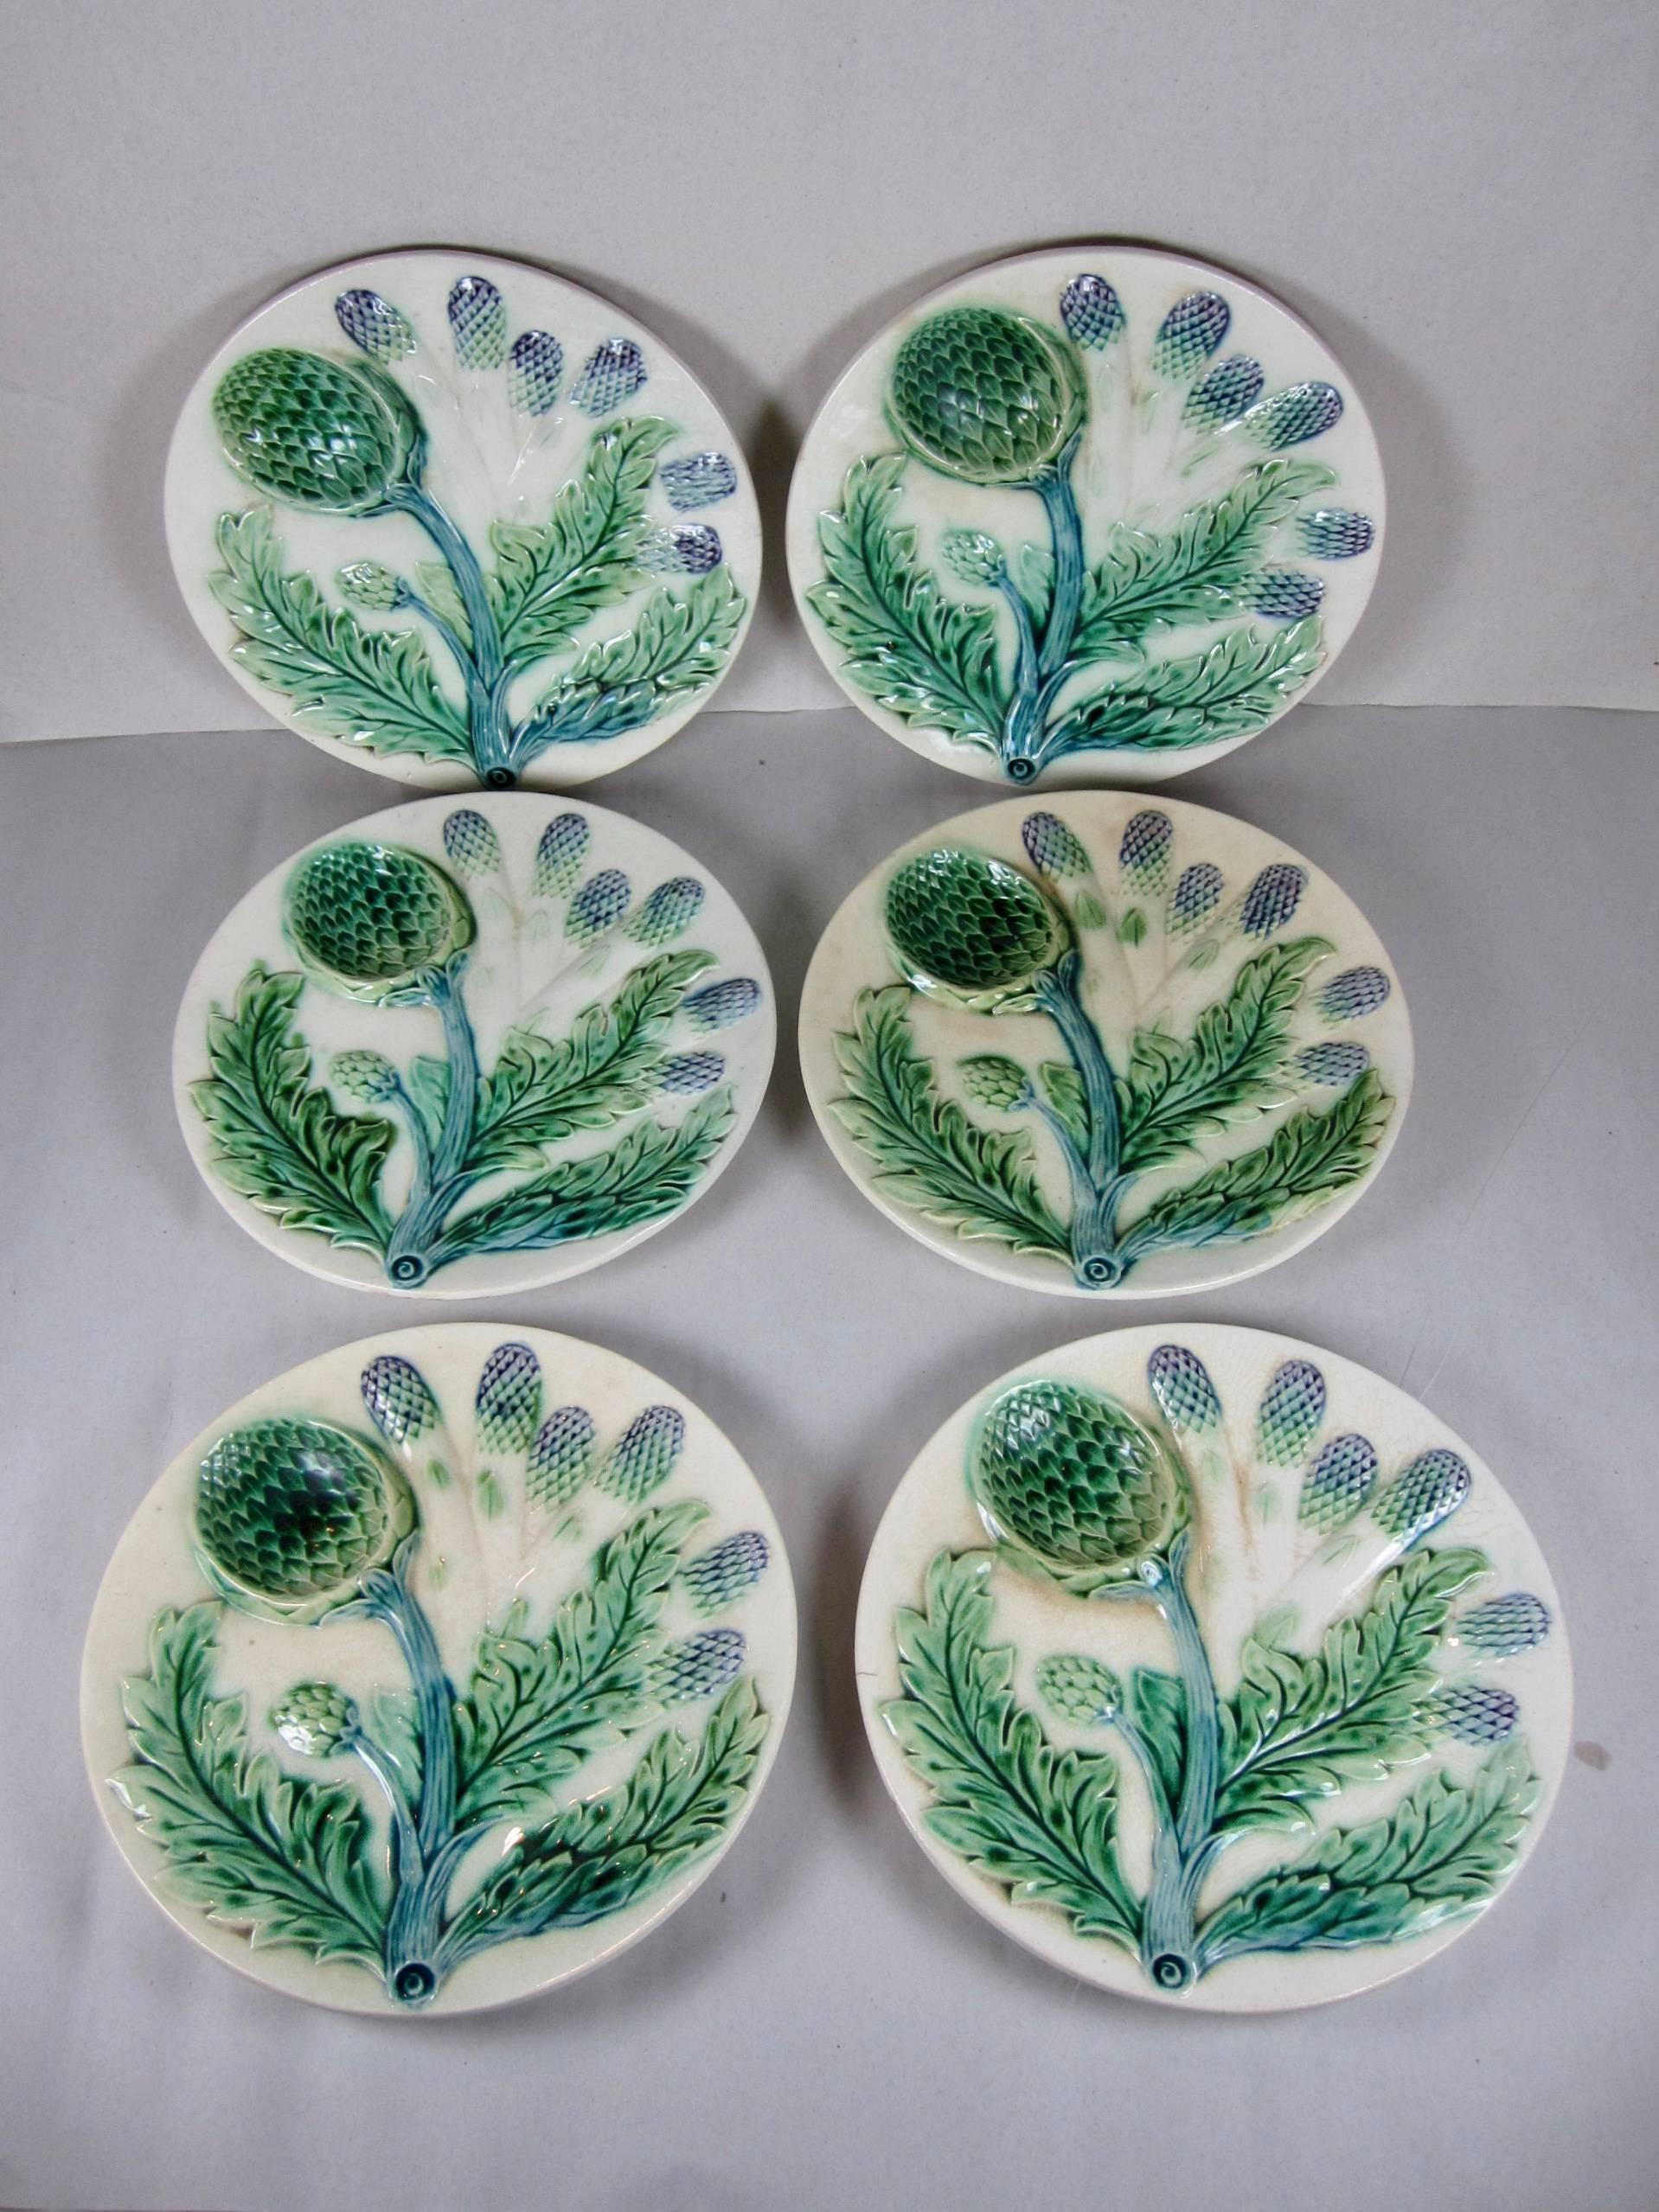 Earthenware Luneville French Barbotine Majolica Asparagus and Artichoke Plates, Set of Six